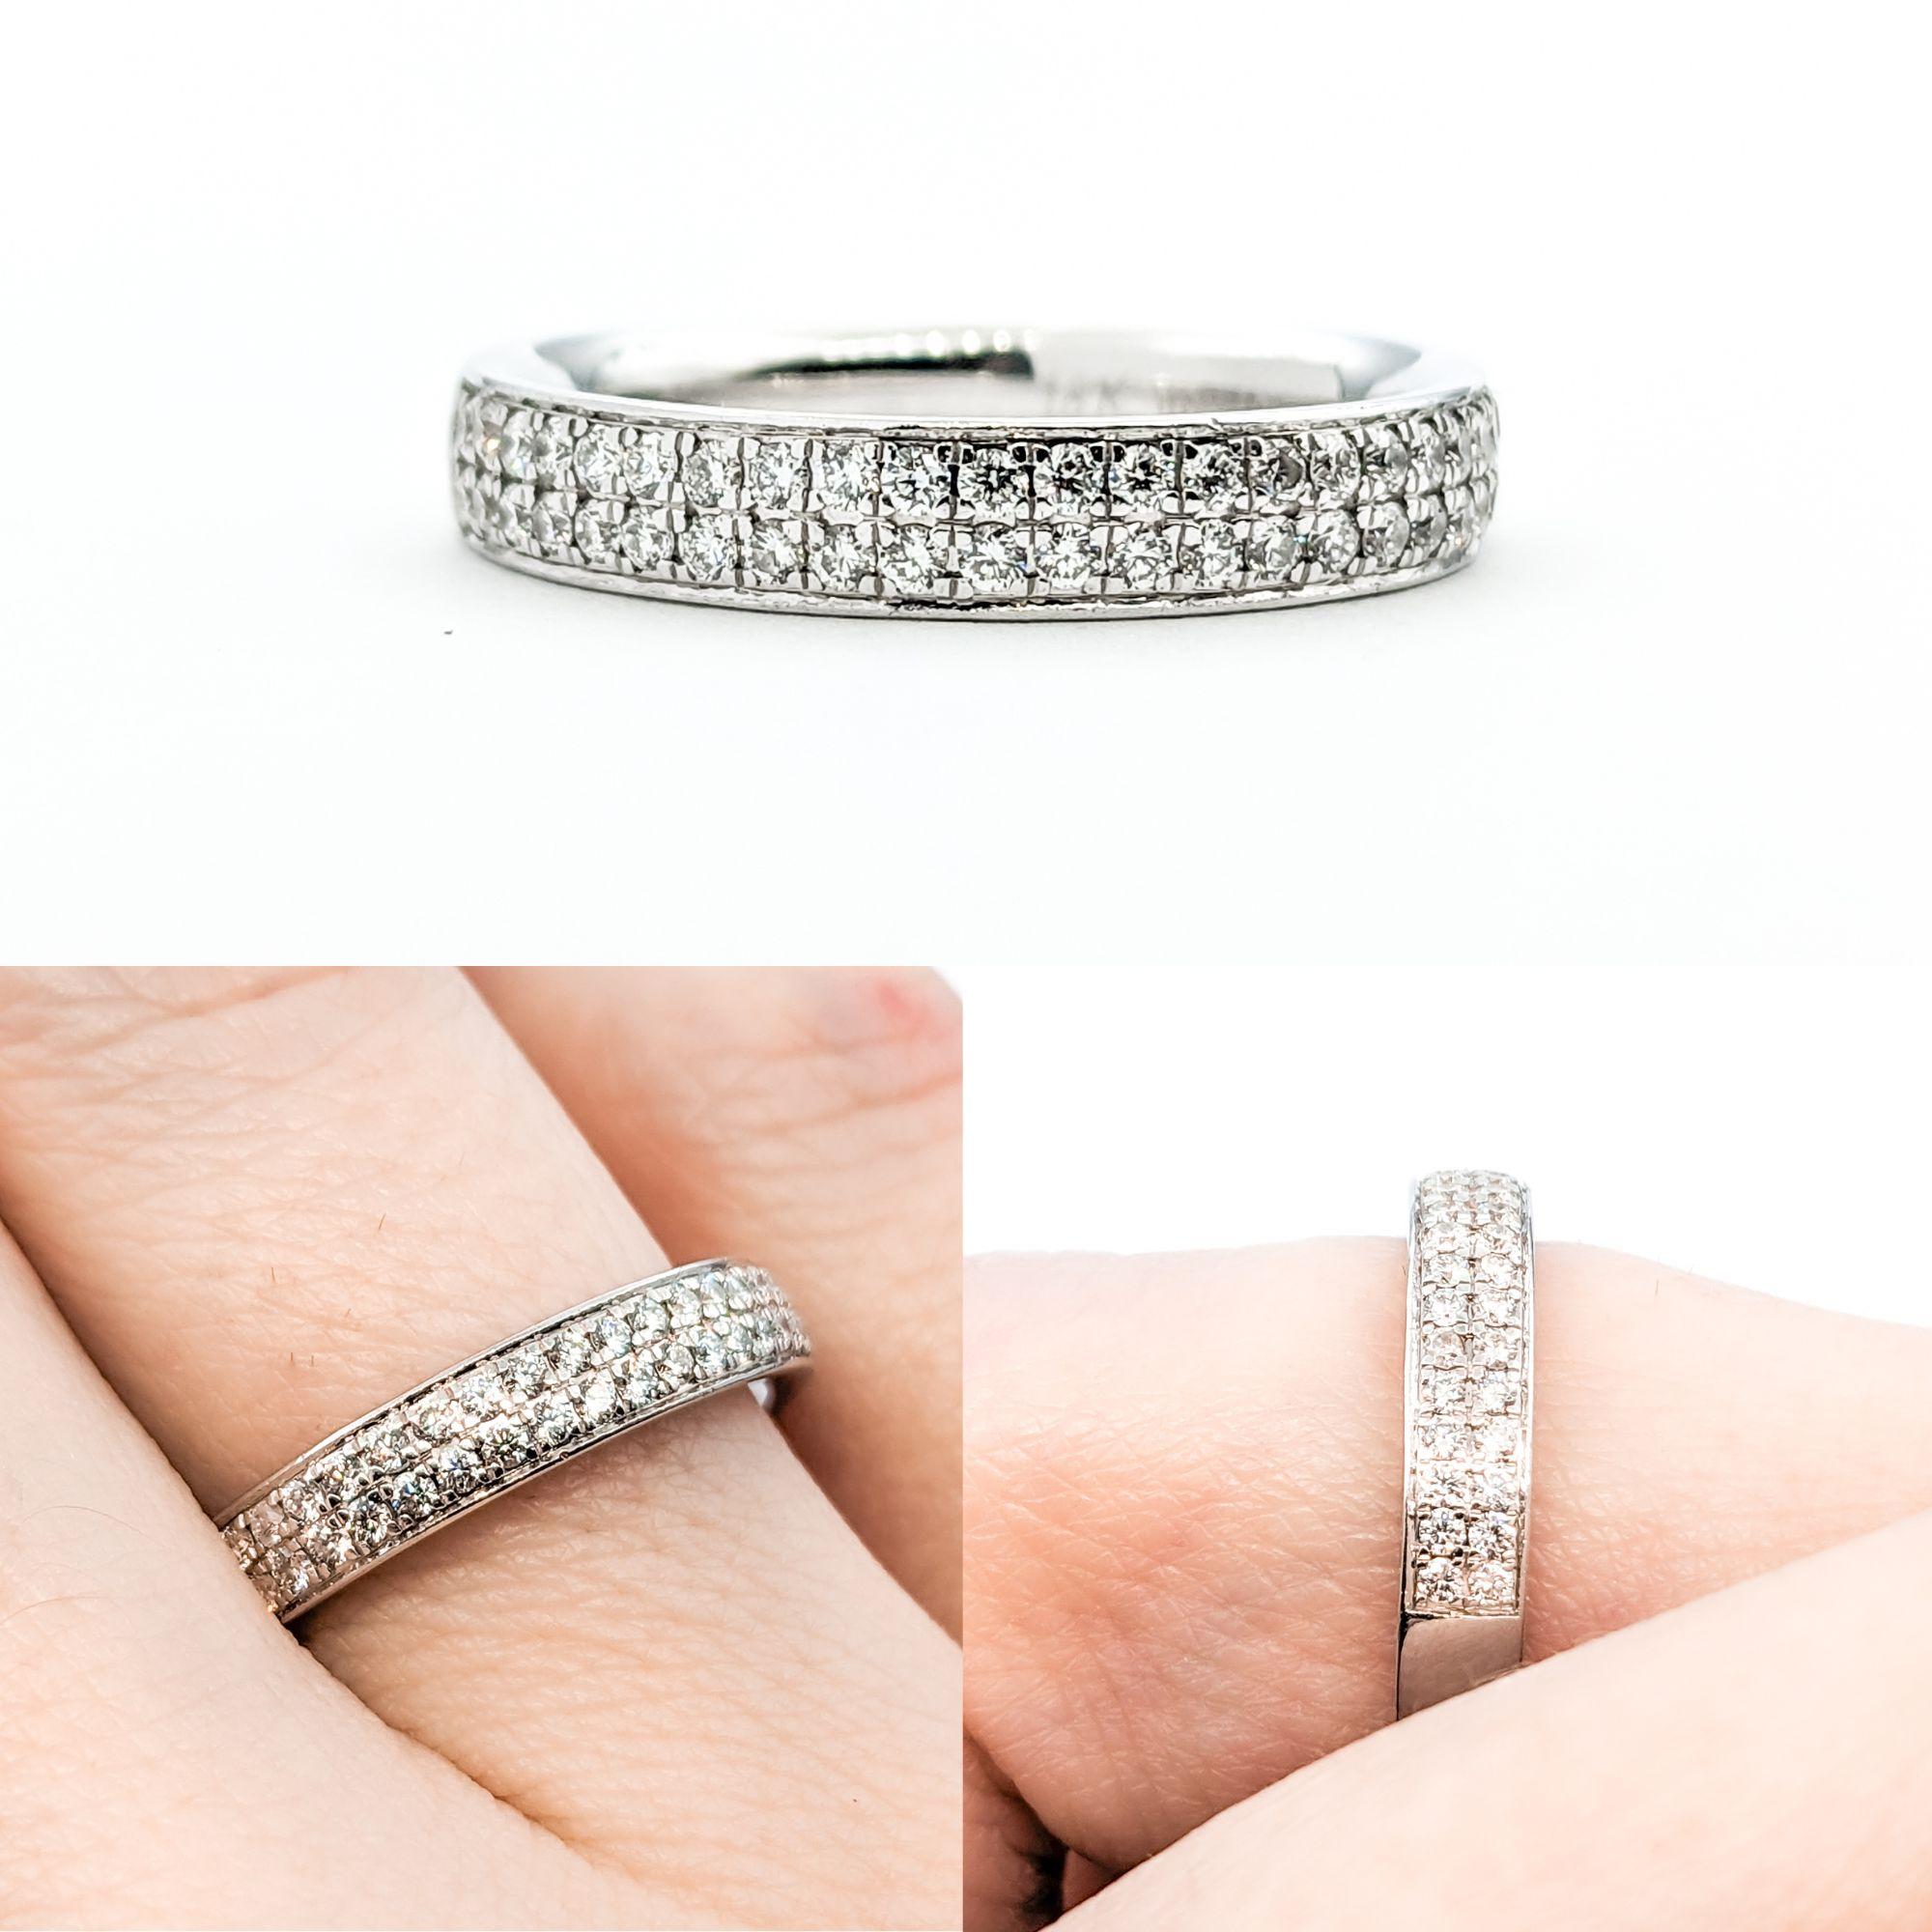 Simon G Bridal Fashion Double Row Diamond Ring In White Gold

This magnificent Simon G Diamond Ring is expertly crafted in bright 18k White Gold. It features a double row of sparkling diamonds totaling .40ctw. These diamonds boast a VS clarity and a